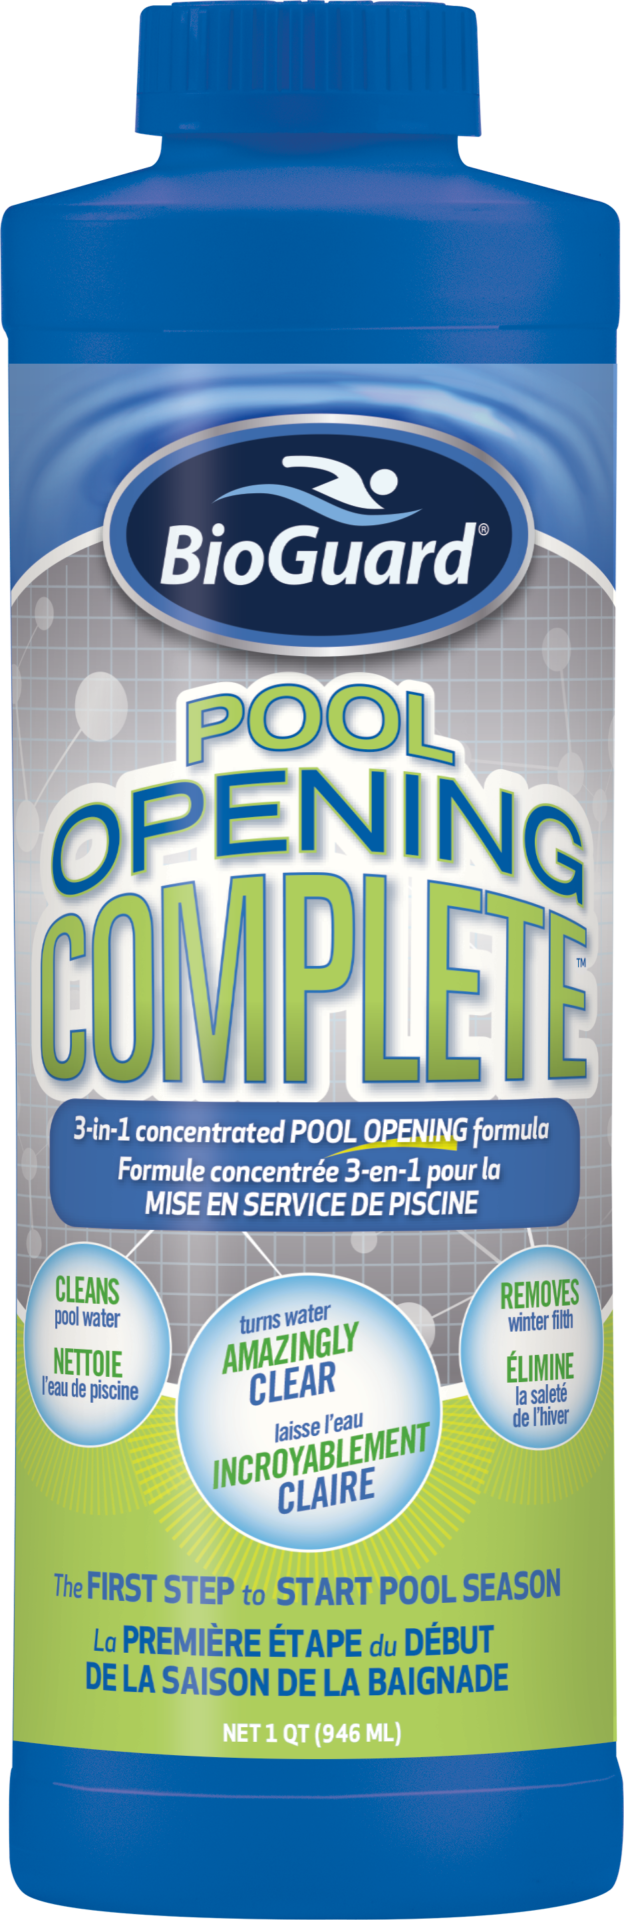 BioGuard Pool Opening Complete 946ml - Pool Opening Complete - 946ml